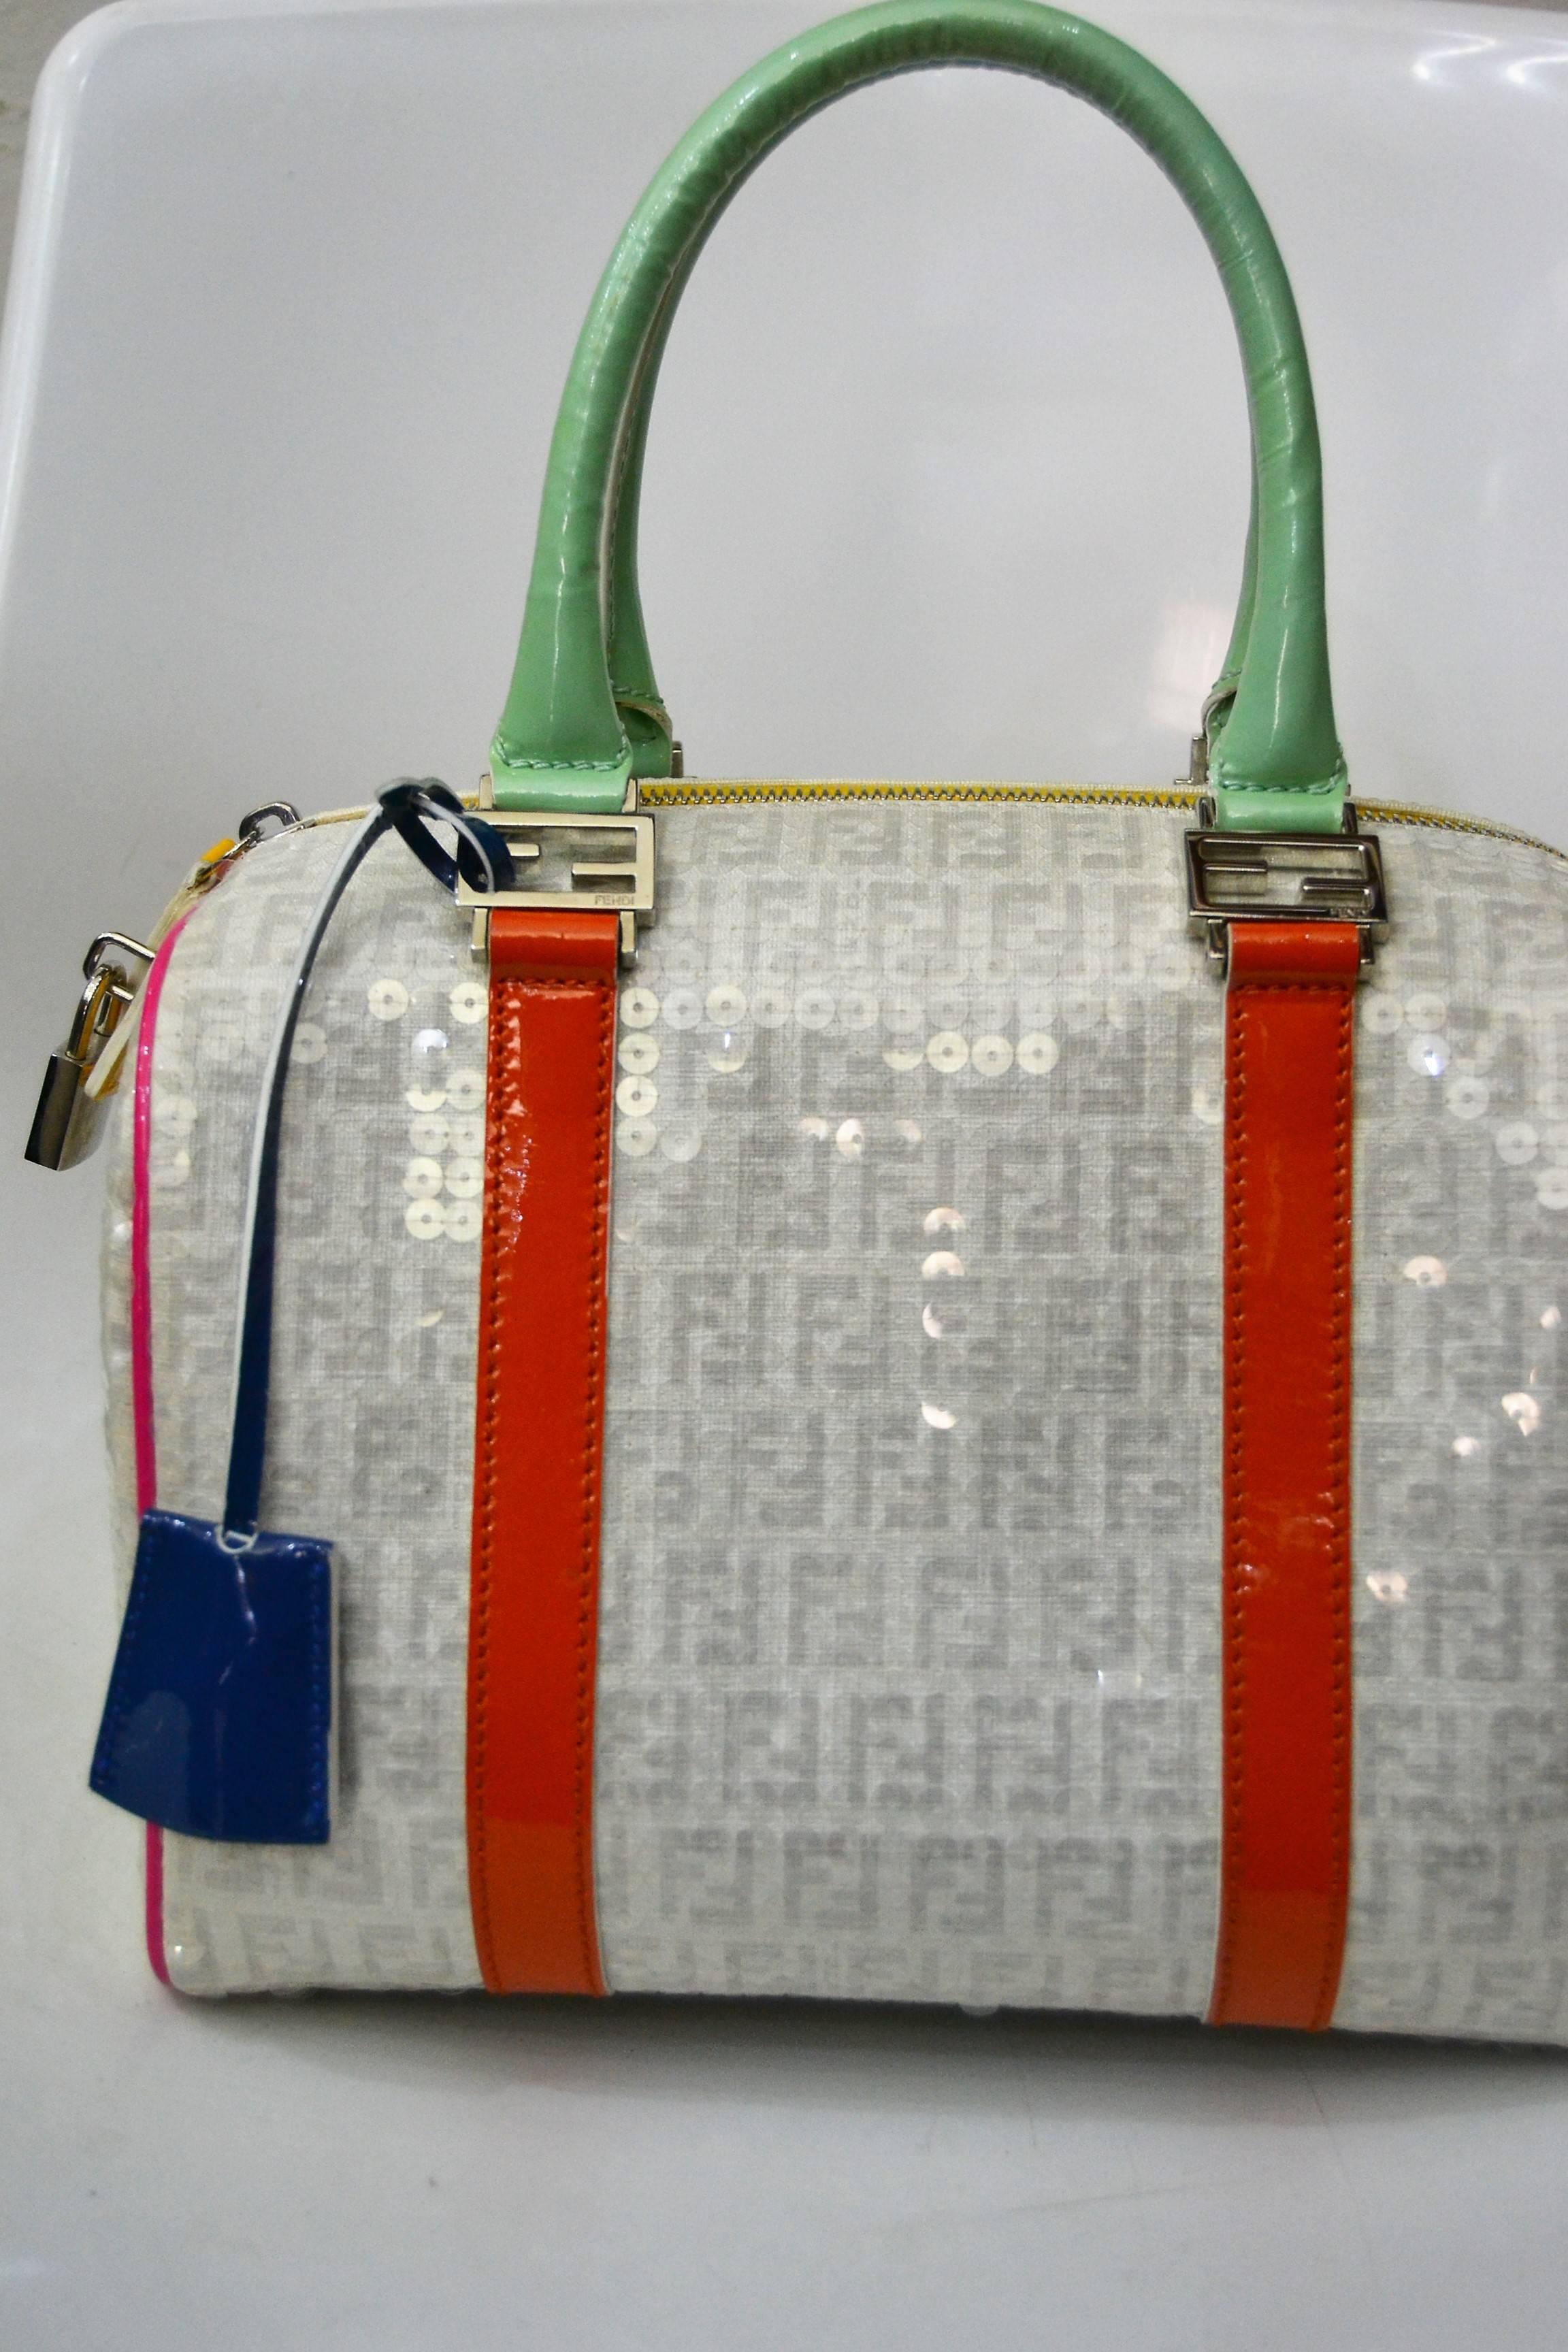 Fendi Forever Multitone sequins boston Bag
White, orange, light green, yellow, fucsia and blu bag
Total lenght with handle_ 33 cm